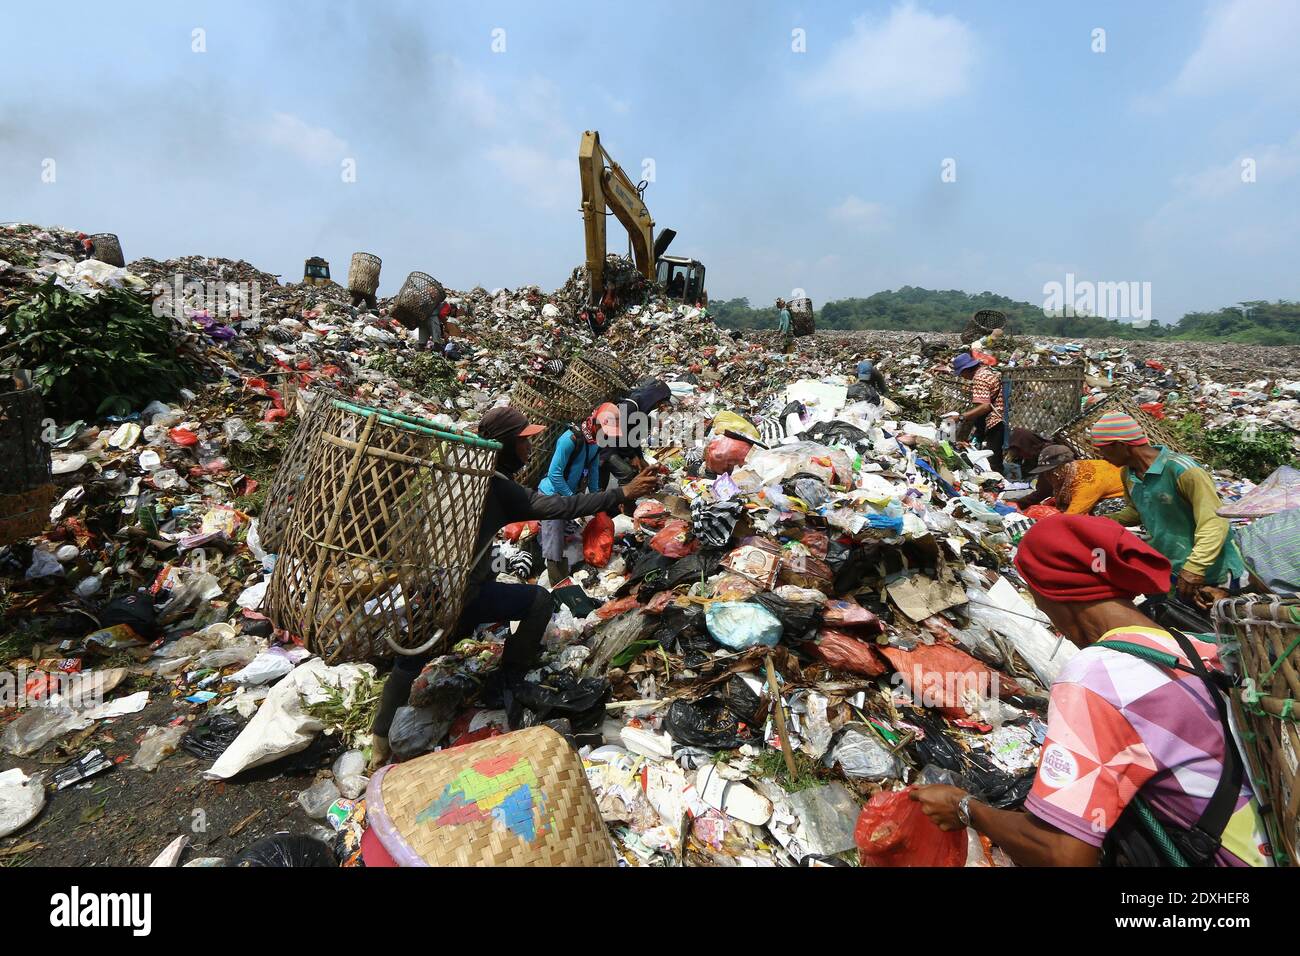 Scavengers are active in piles of rubbish in the landfill (TPA) of Galuga garbage, Cibungbulang, Bogor Regency, West Java. Stock Photo